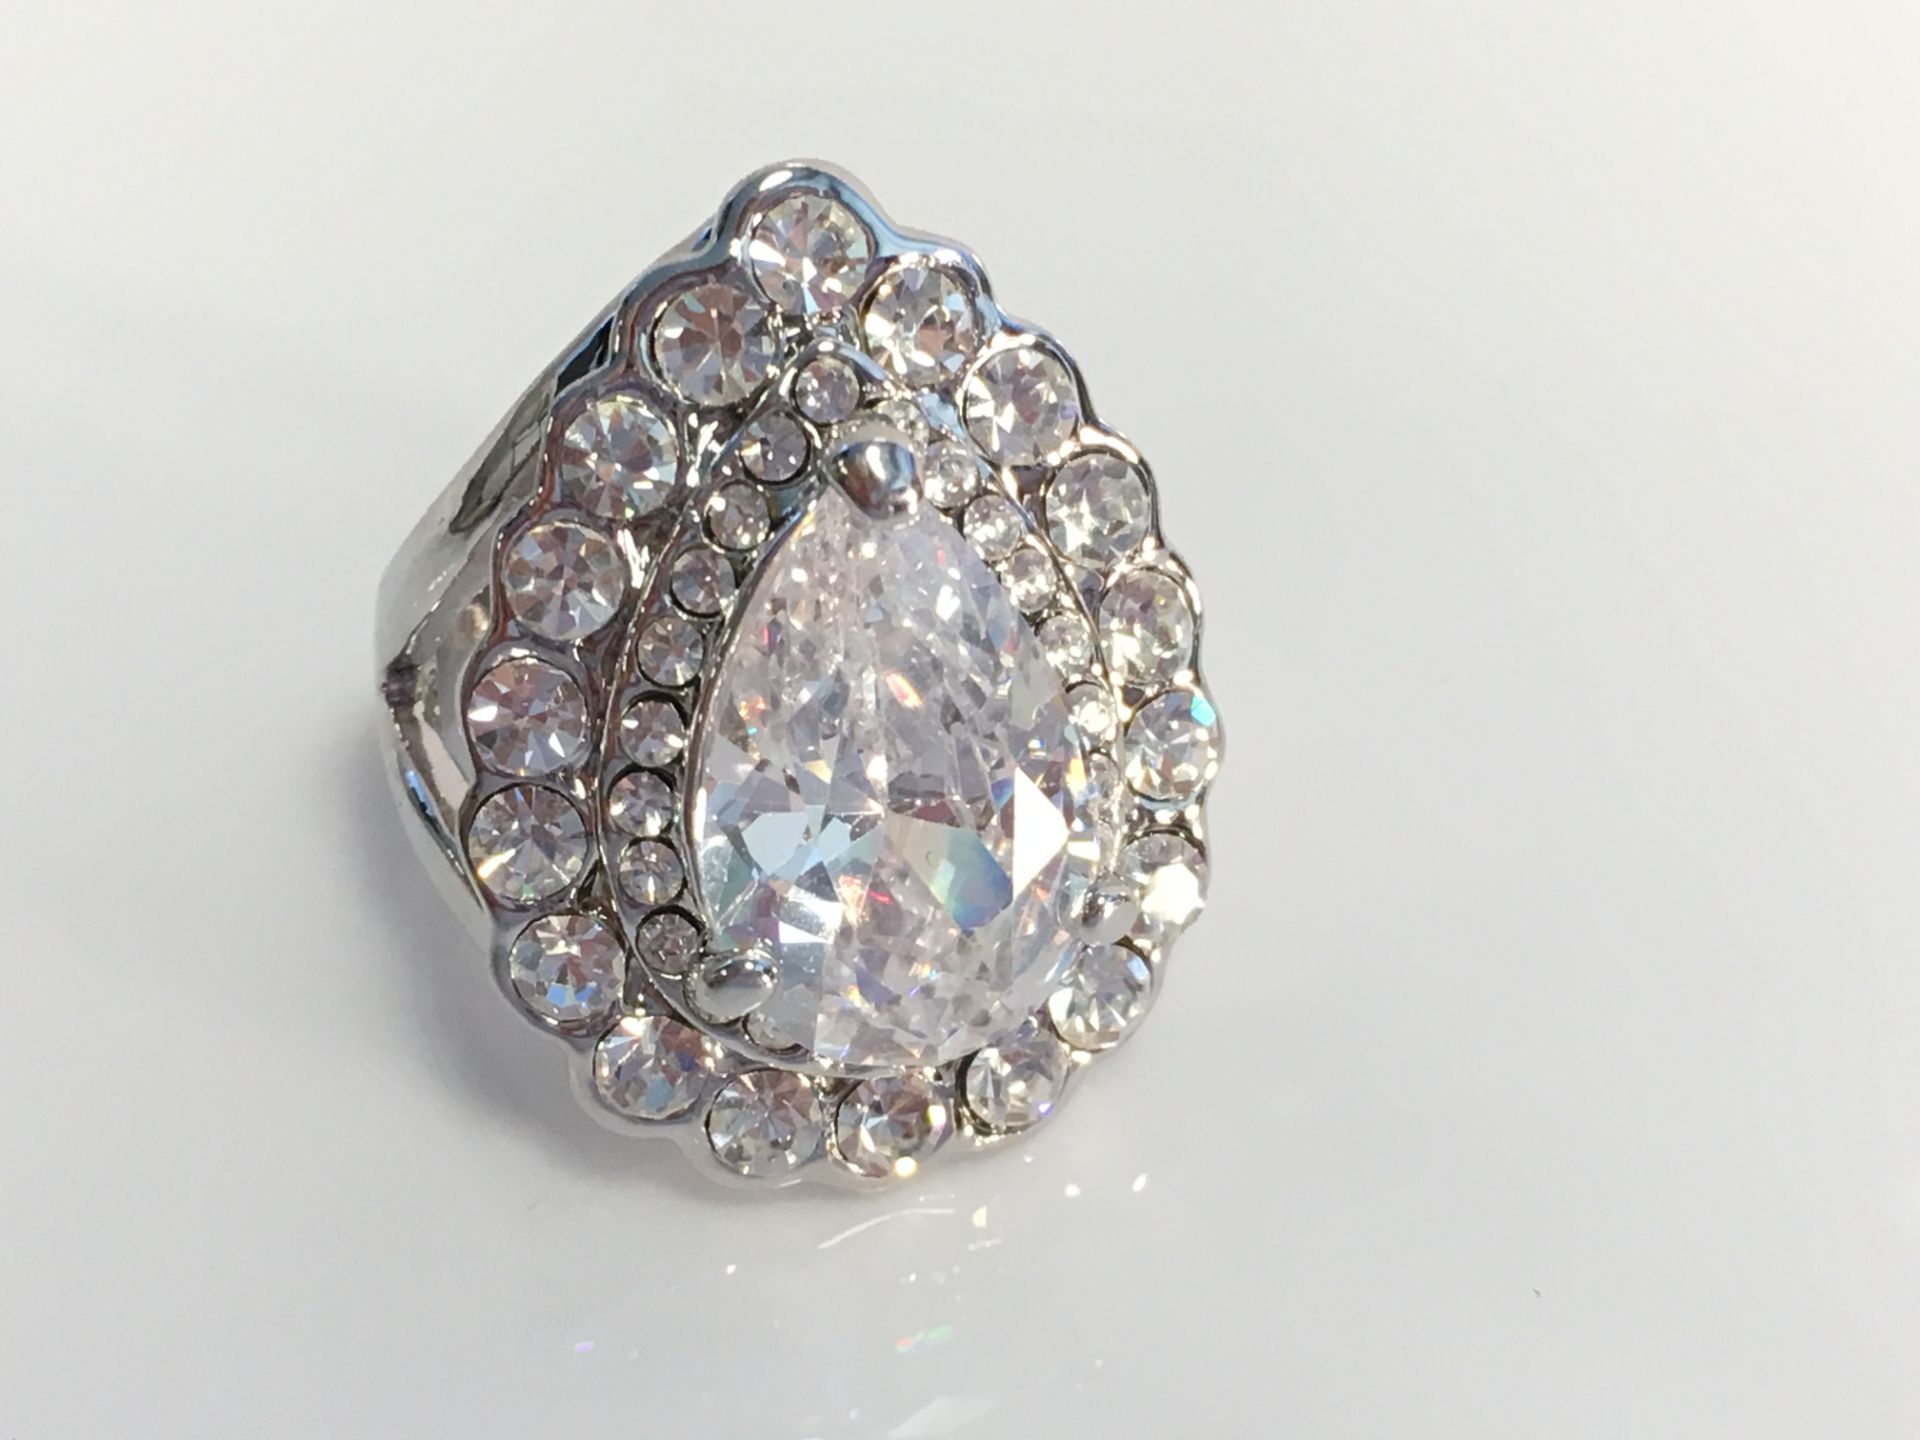 Brand New Pear Shape Simulated Silver Swarovski Elements Cocktail Ring